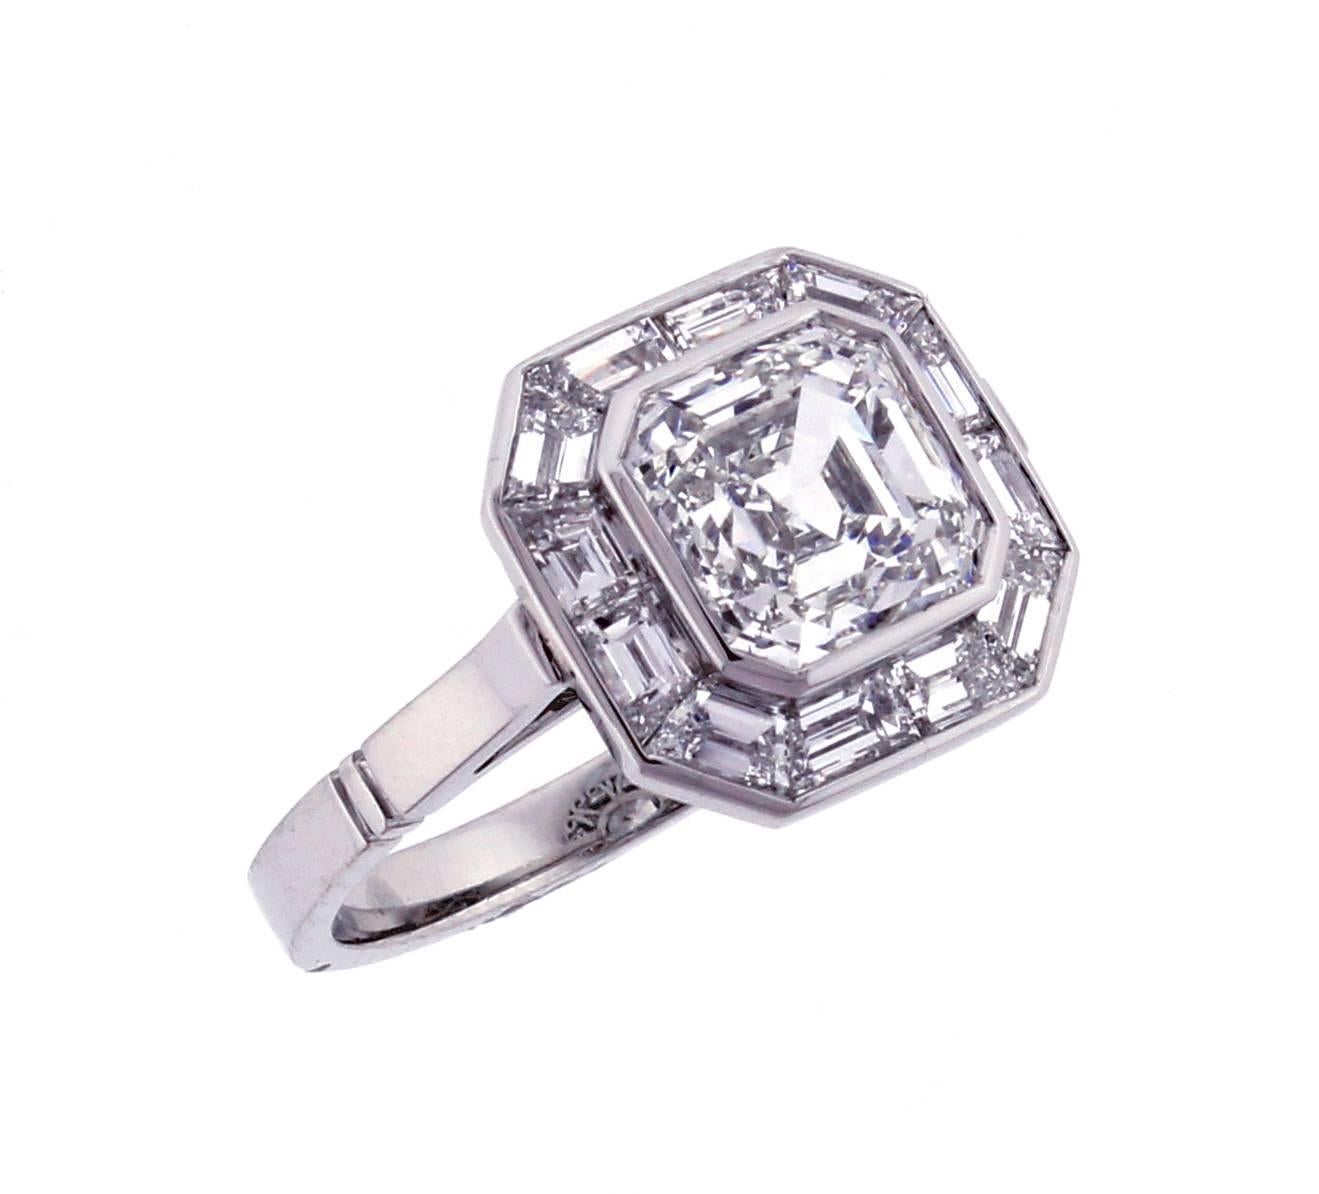 From Pampillonia, this well appointed Asscher cut diamond engagement ring. The center  G.I.A. Asscher cut diamond weighs 2.01 carats,is H color and VVS2 clarity. Twelve specially cut baguette cut diamonds weighing 1.20 carats frame the center